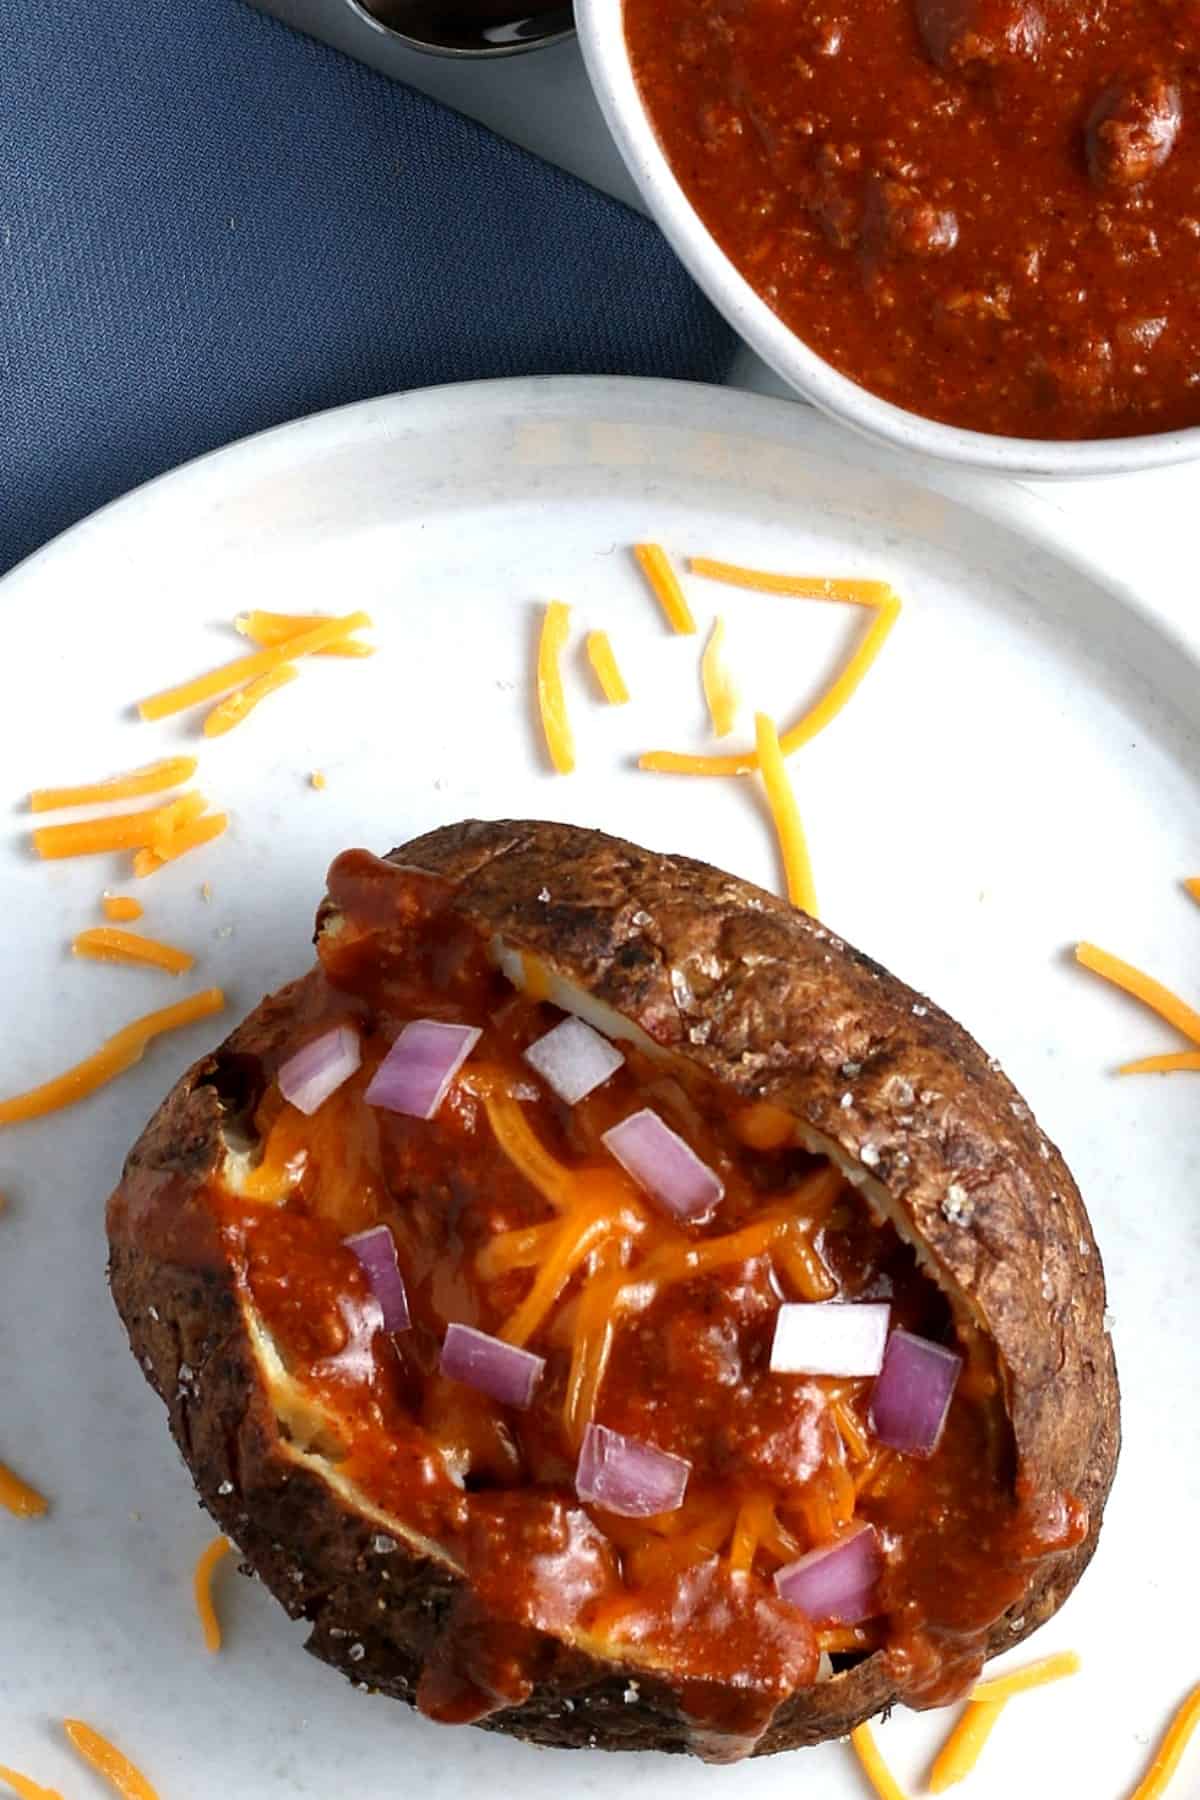 Overhead view of a baked potato filled with chili on a white plate with a bowl of serving chili on the side.